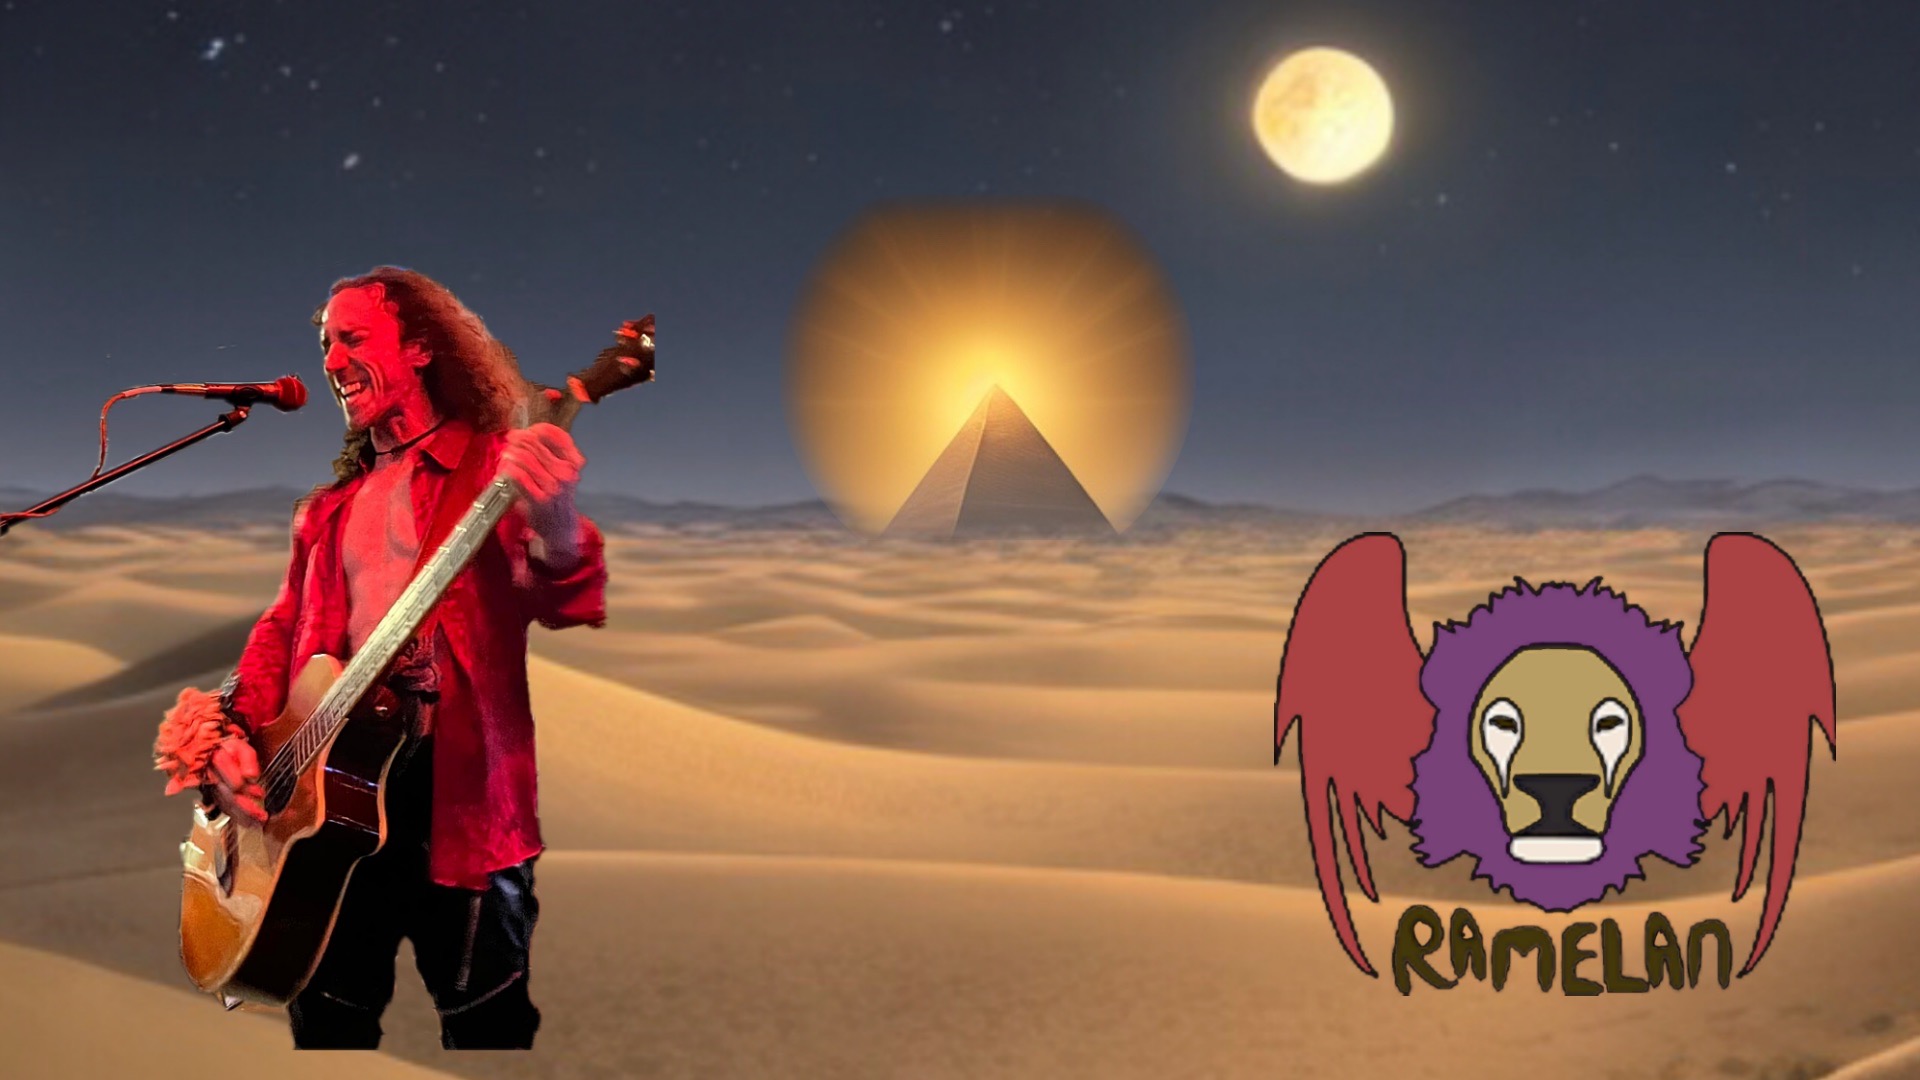 Header Image: AI art desert dunes at night with moon and shining pyramid, photo of Matthew Rondeau playing desert bass and singing, and logo of Ramelan griffin